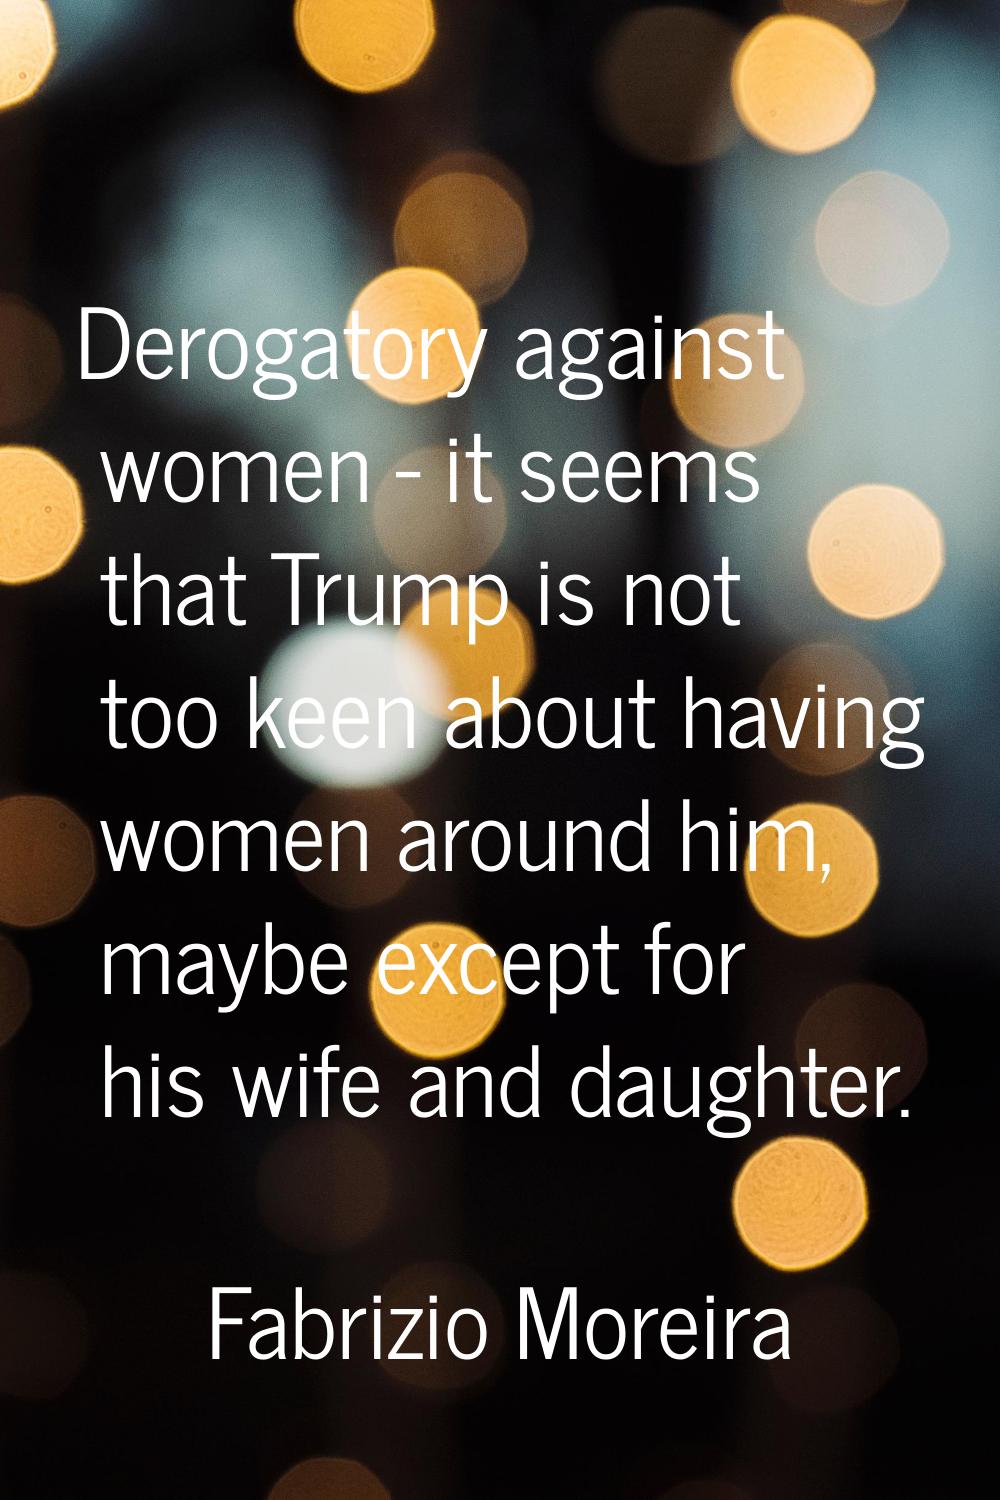 Derogatory against women - it seems that Trump is not too keen about having women around him, maybe